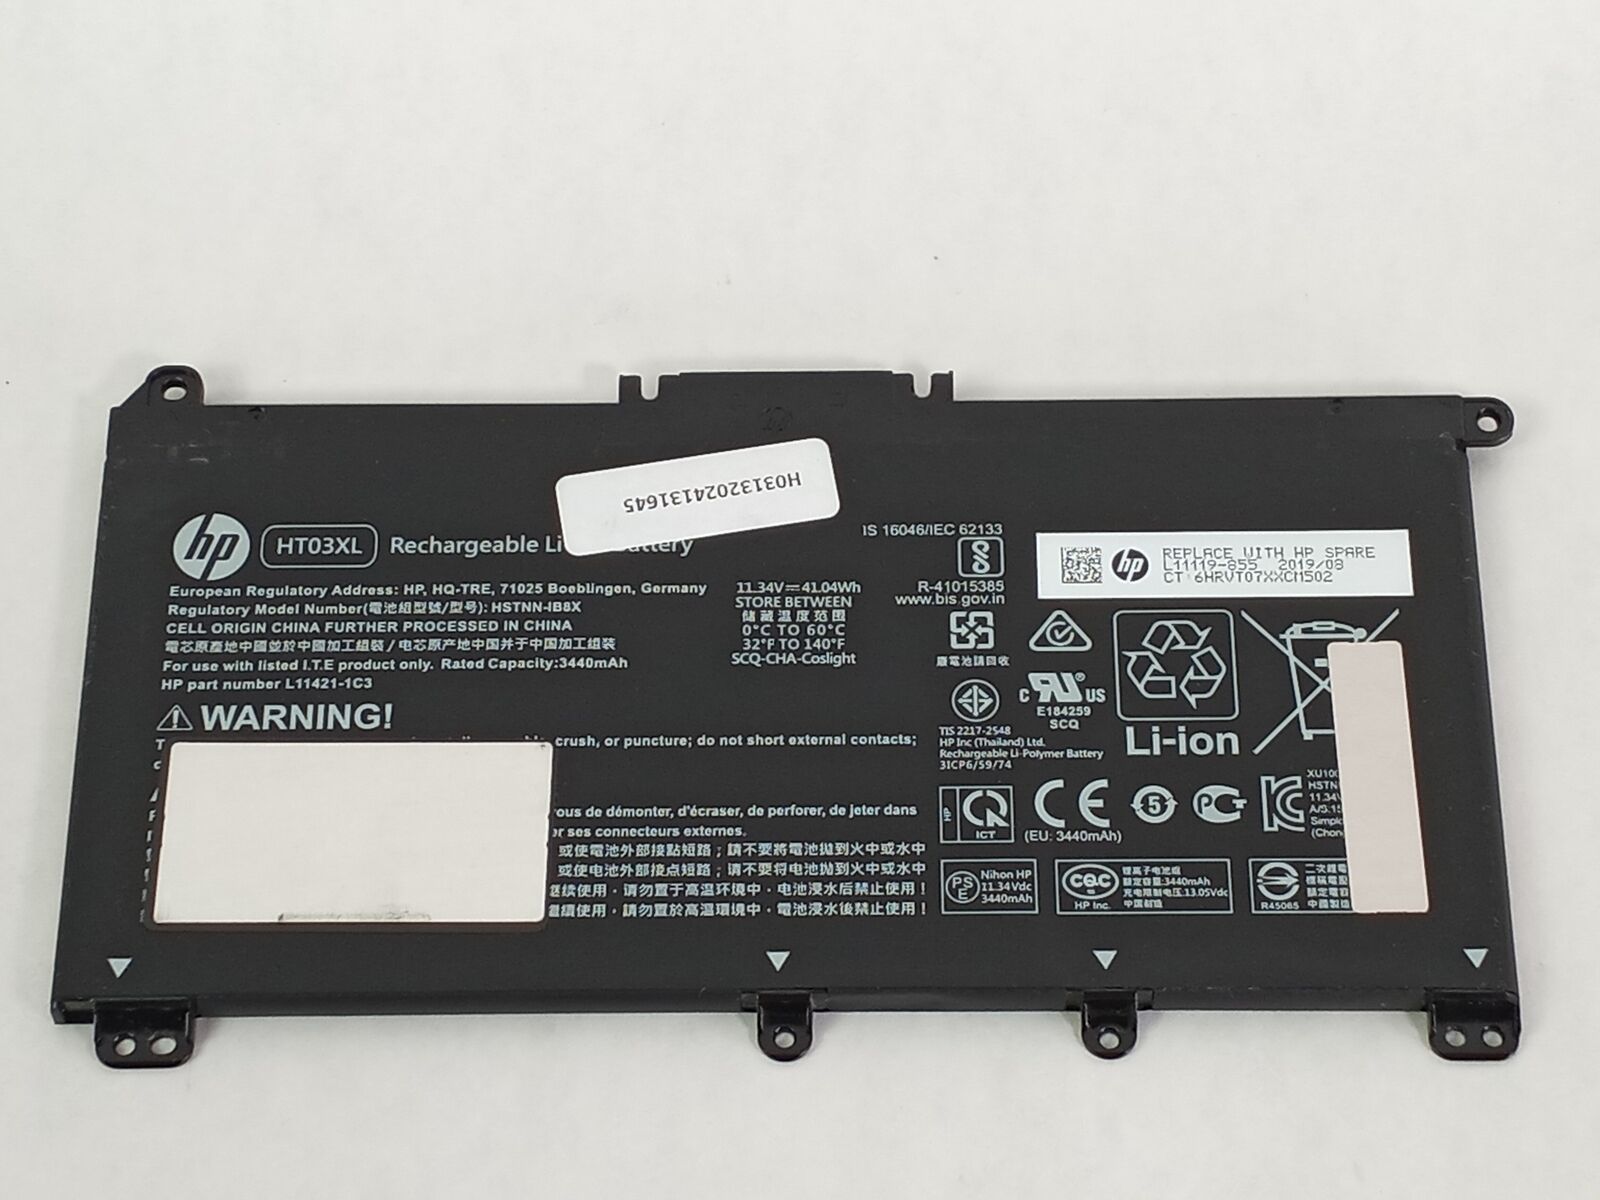 Lot of 5 HP L11119-855 3470mAh 3 Cell Laptop Battery for Pavilion 14 / 15